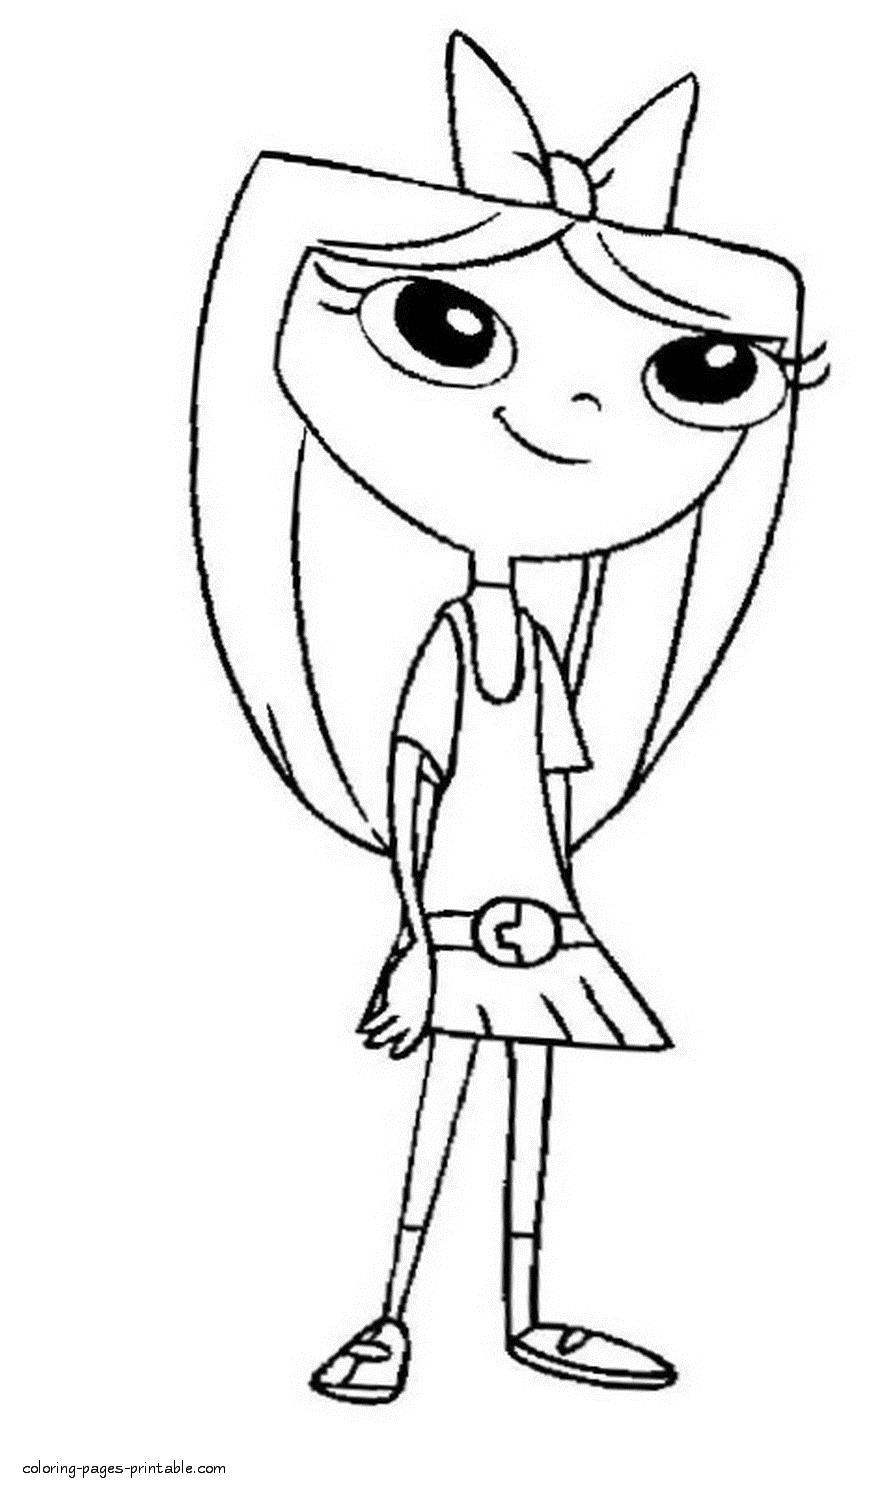 Isabella coloring page || COLORING-PAGES-PRINTABLE.COM